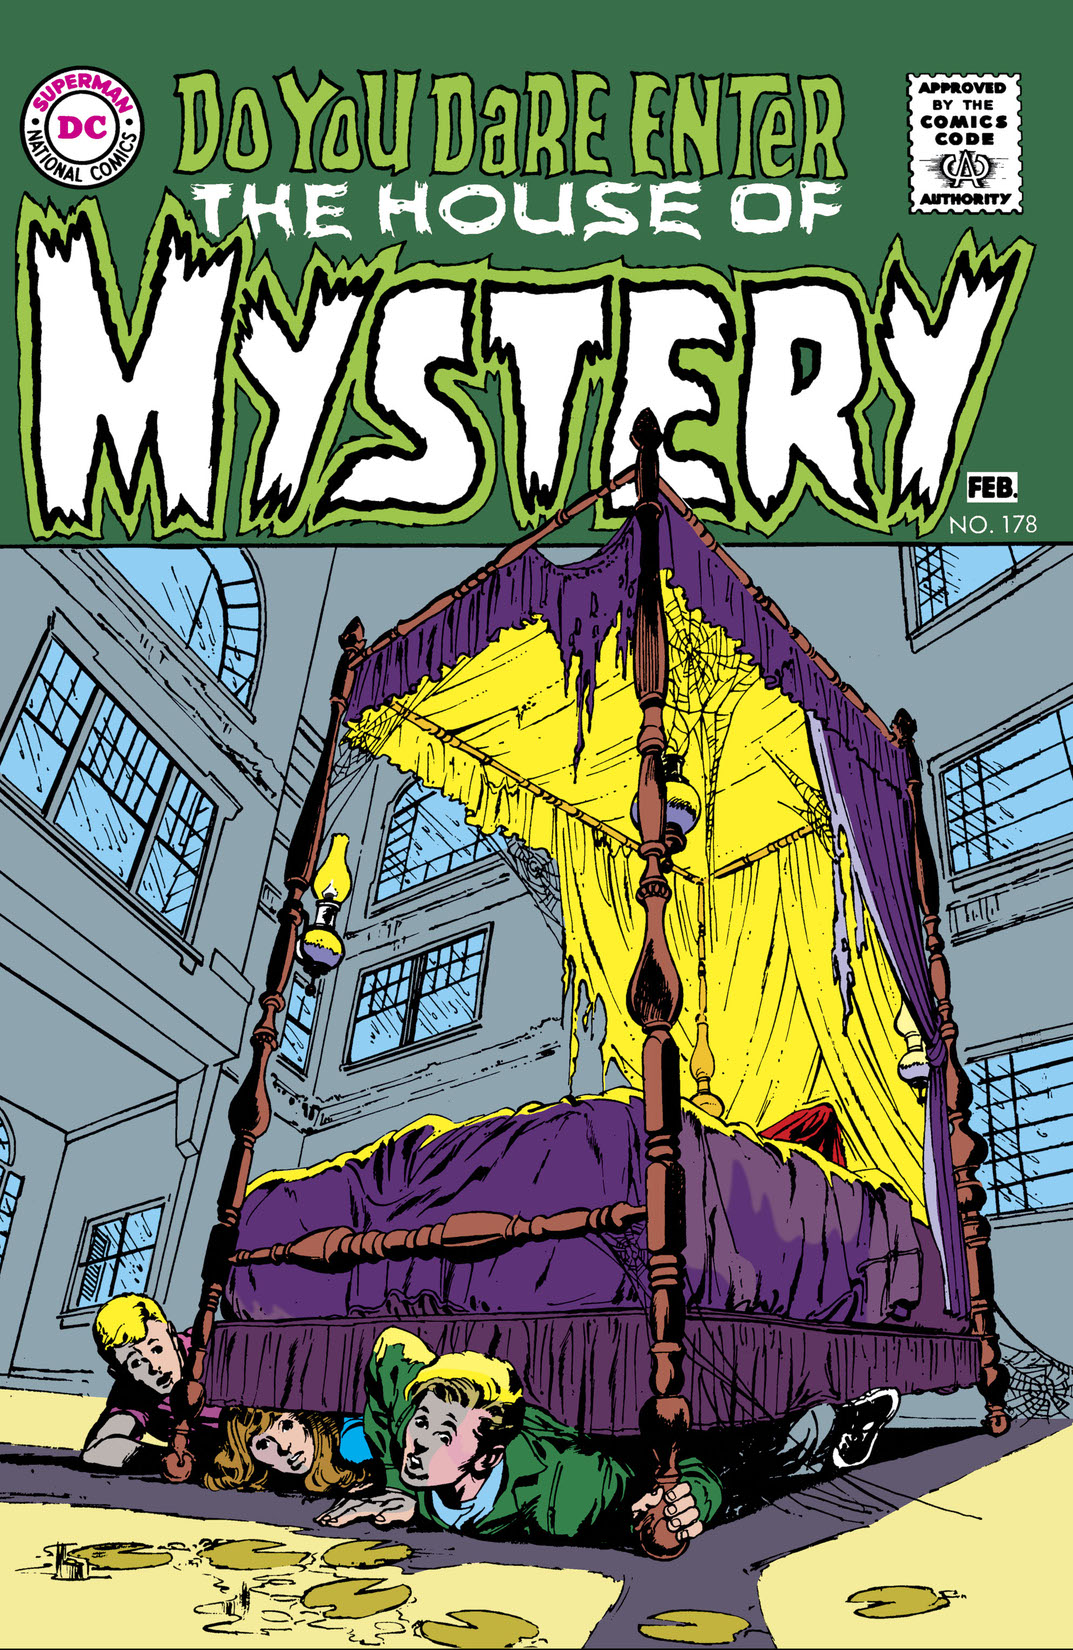 House of Mystery (1951-) #178 preview images